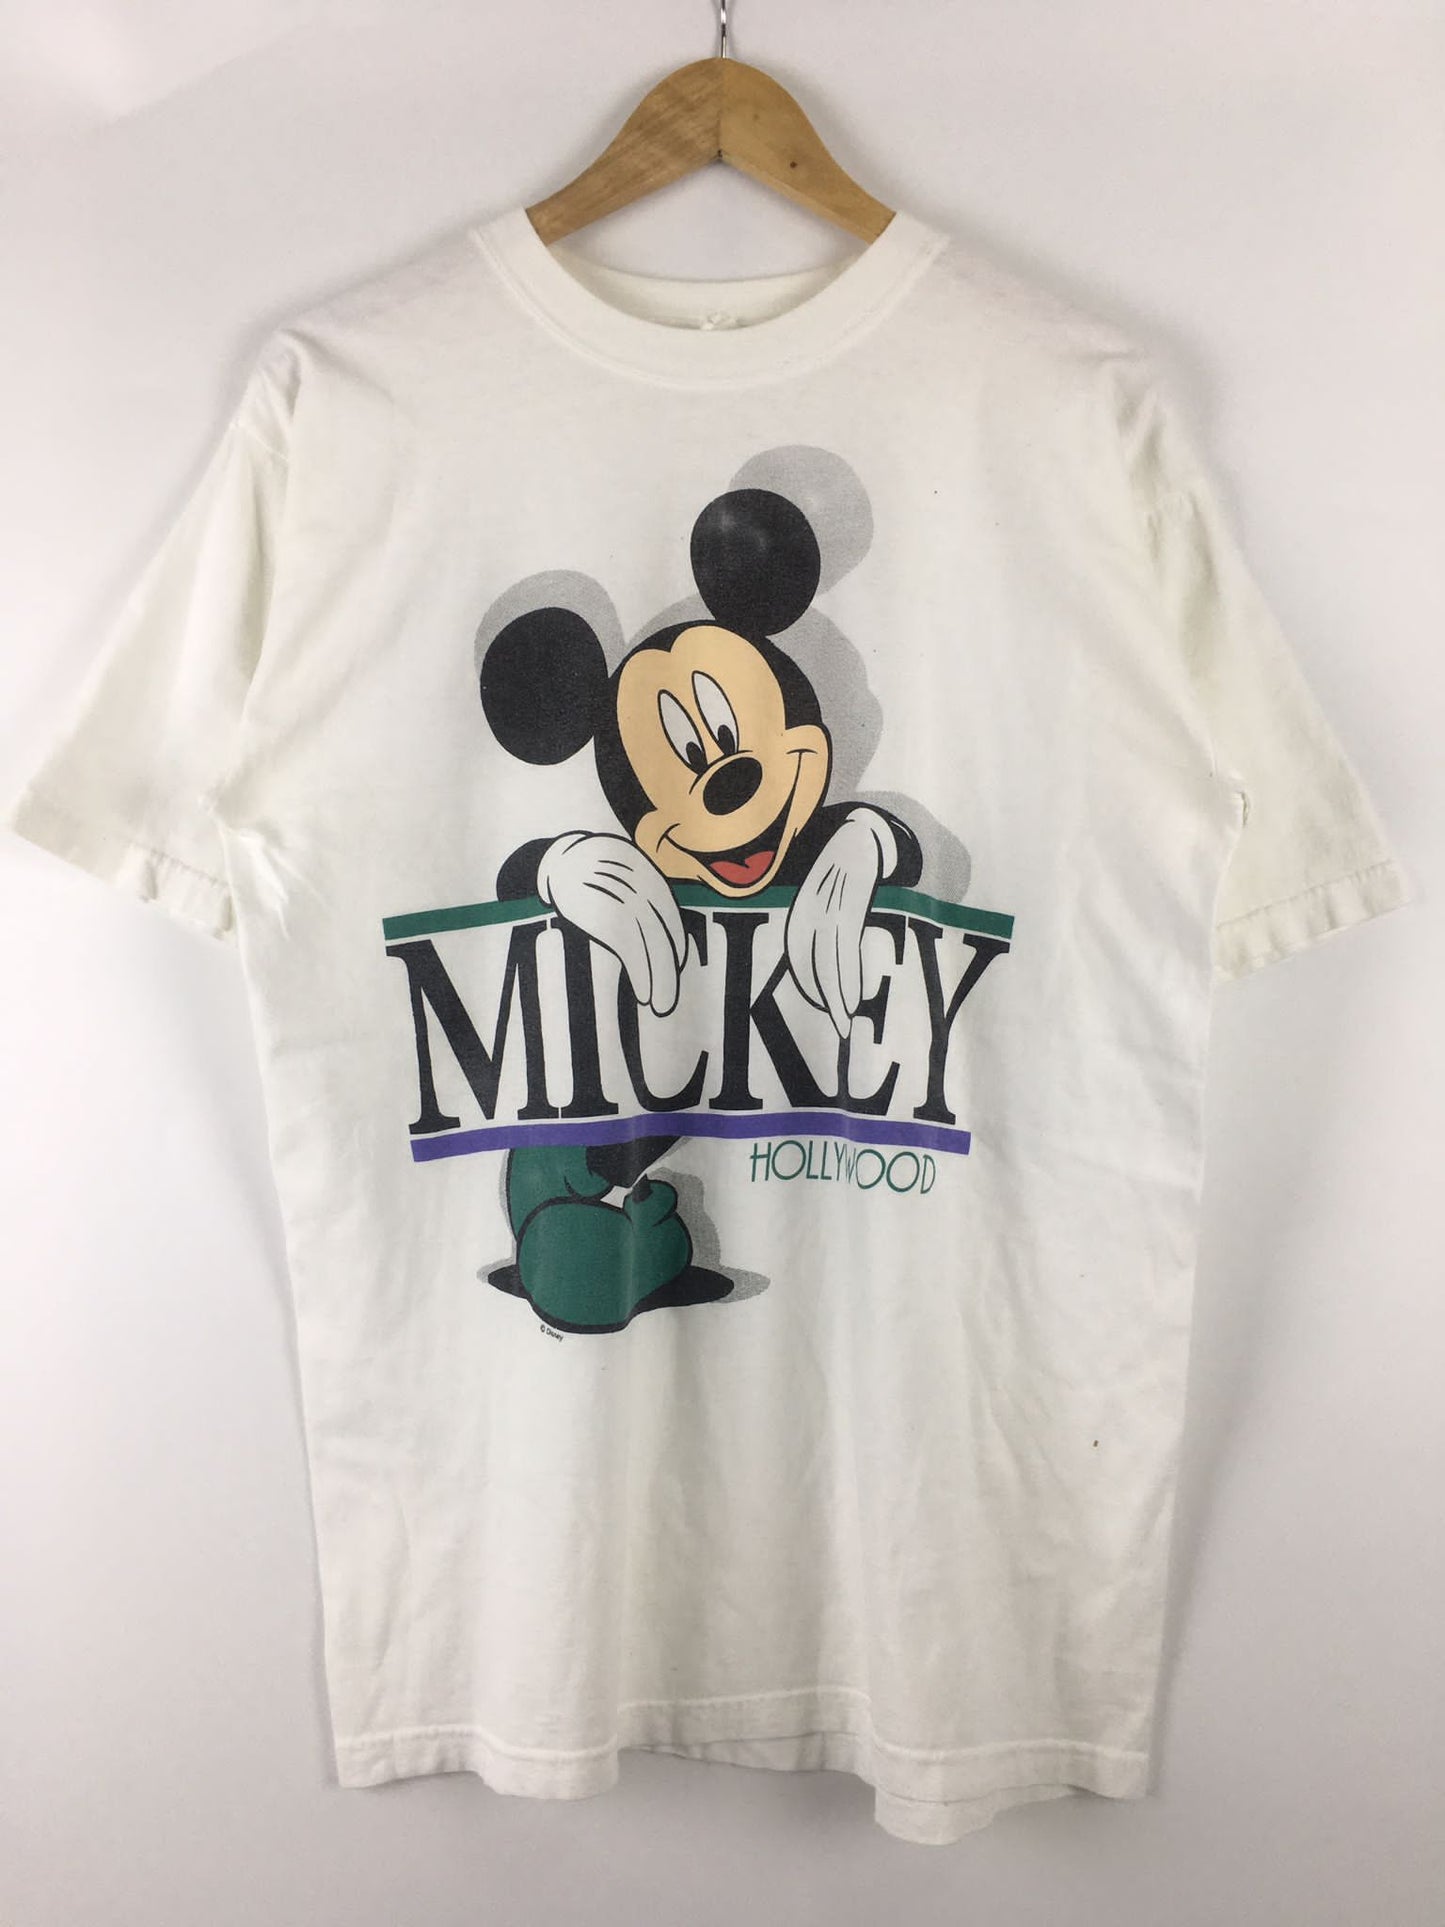 Vintage Mickey Mouse 90's Hollywood T-shirt